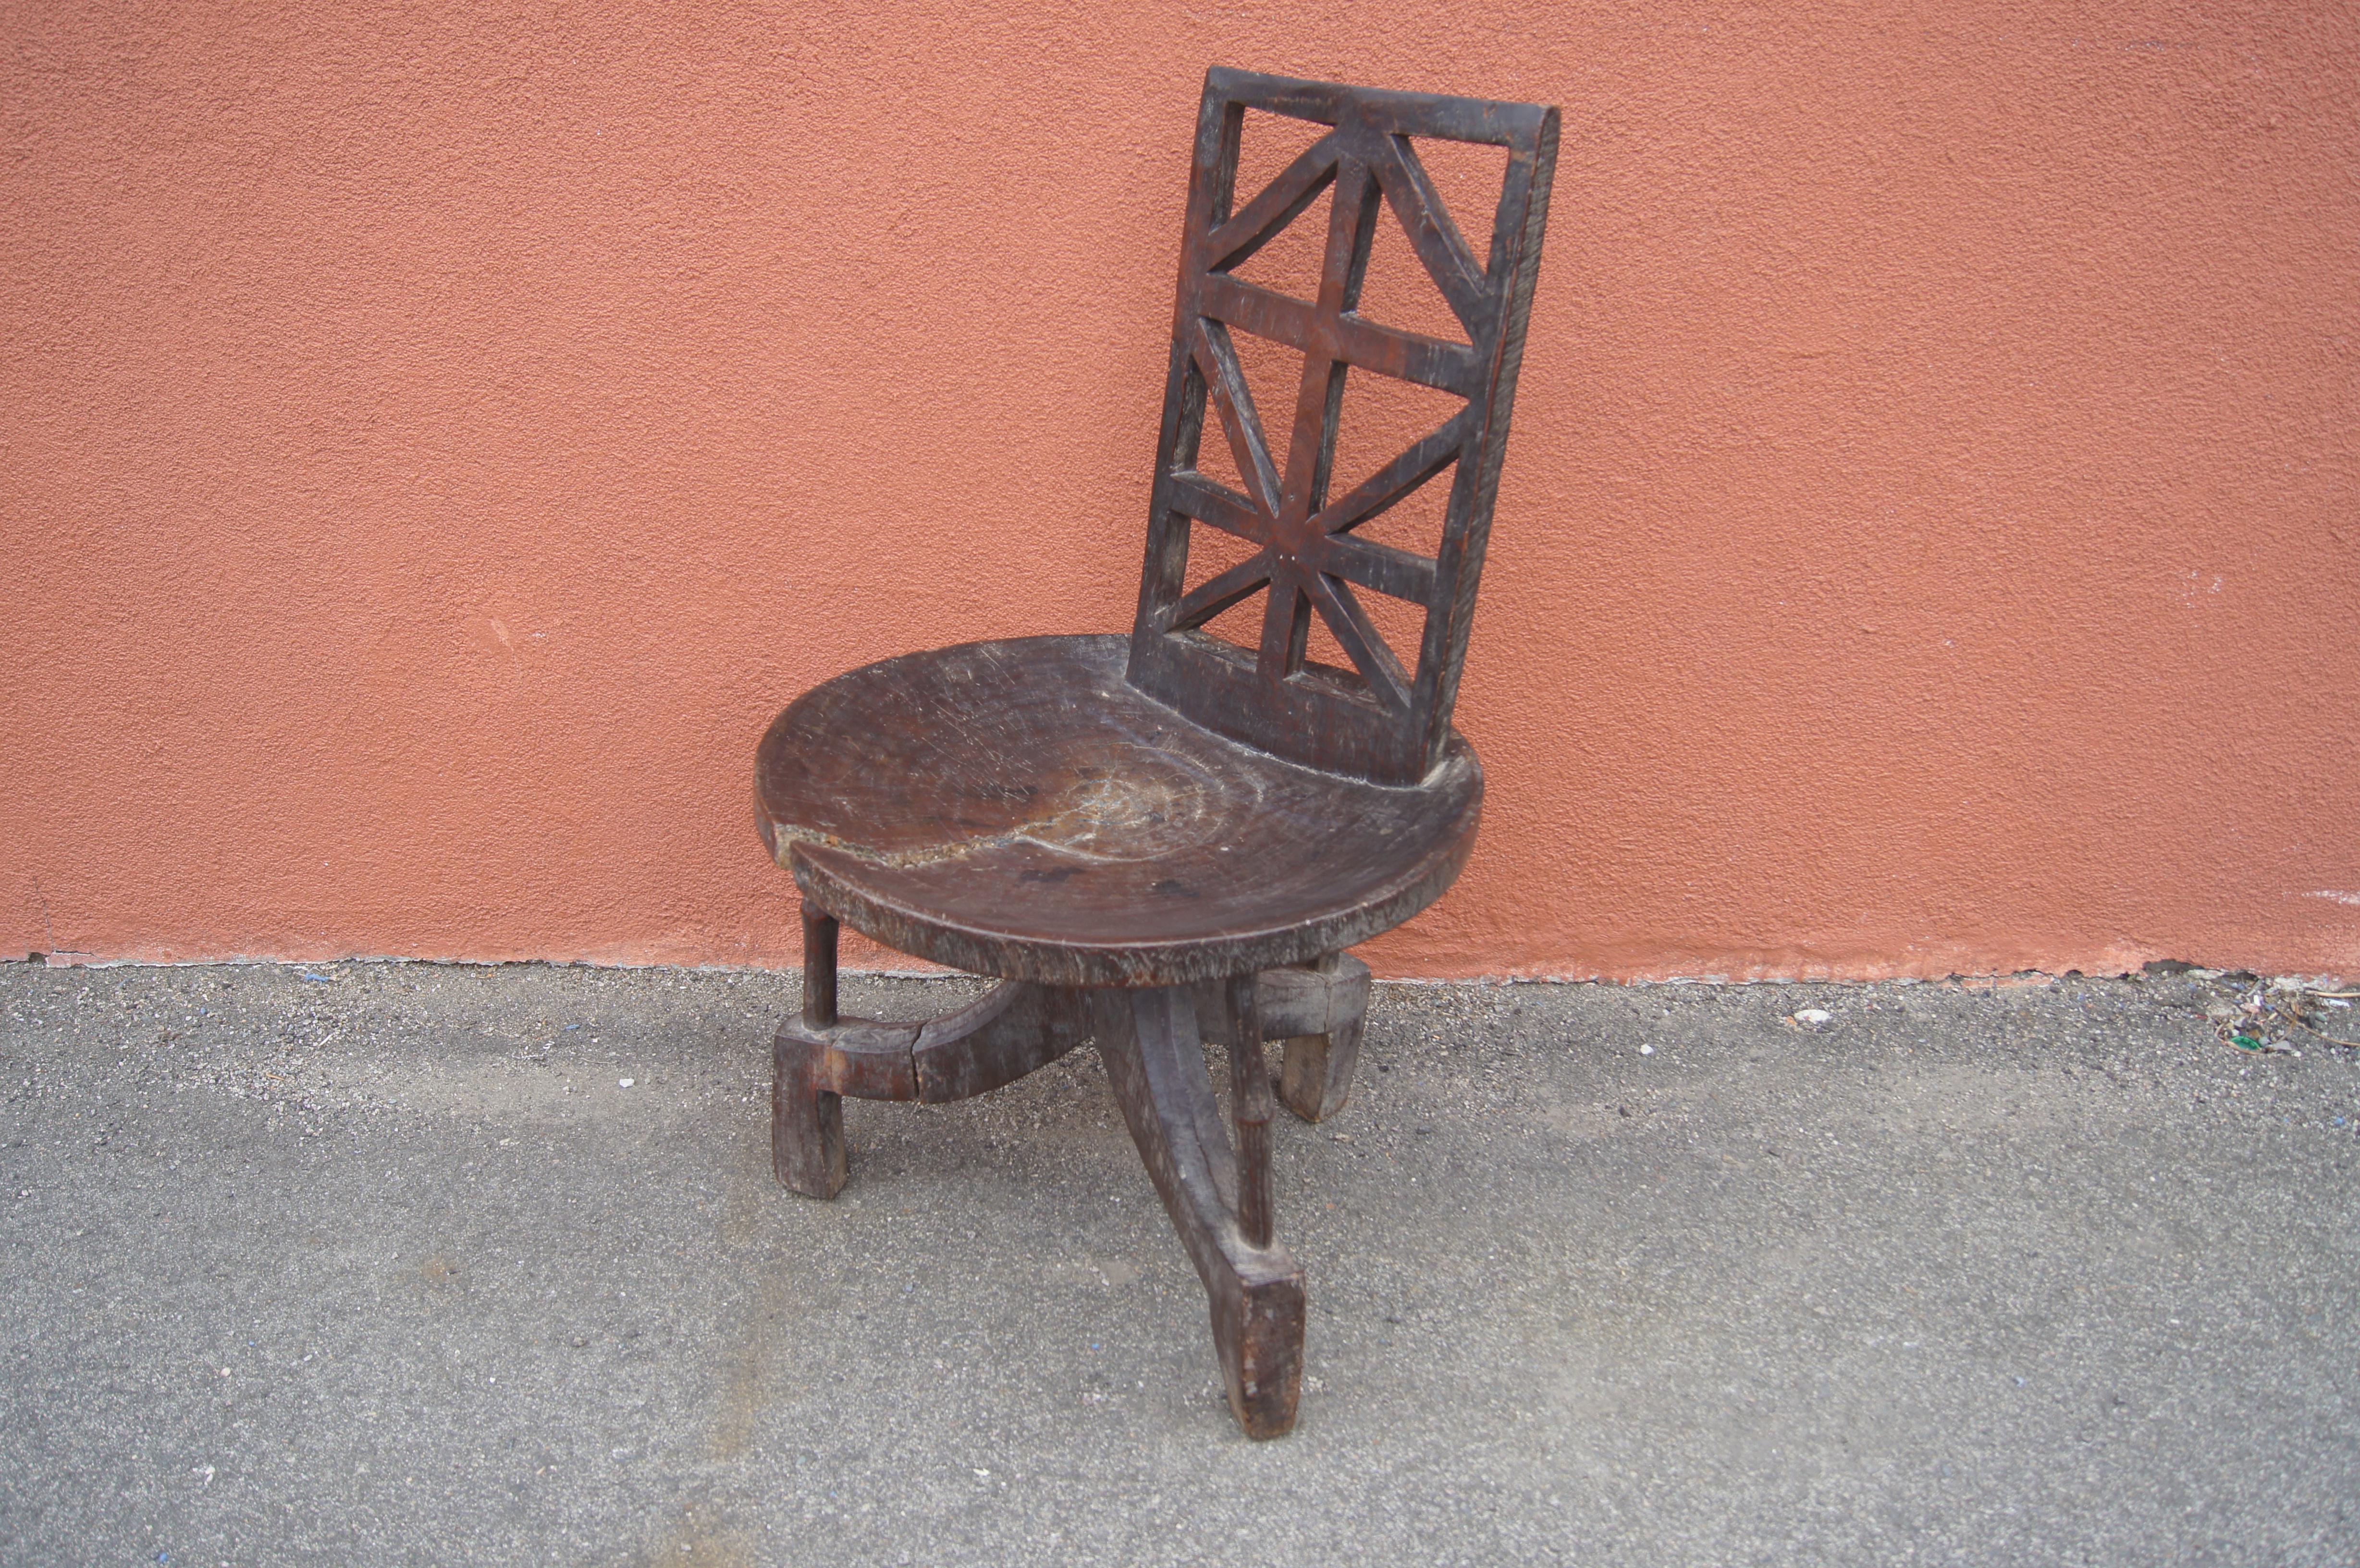 This carved wooden chair most likely comes from the Jimma people of Southern Ethiopia. A capacious slightly concave seat sits on tripod base connected by slender rods. The high rectangular seatback has a geometric openwork design.